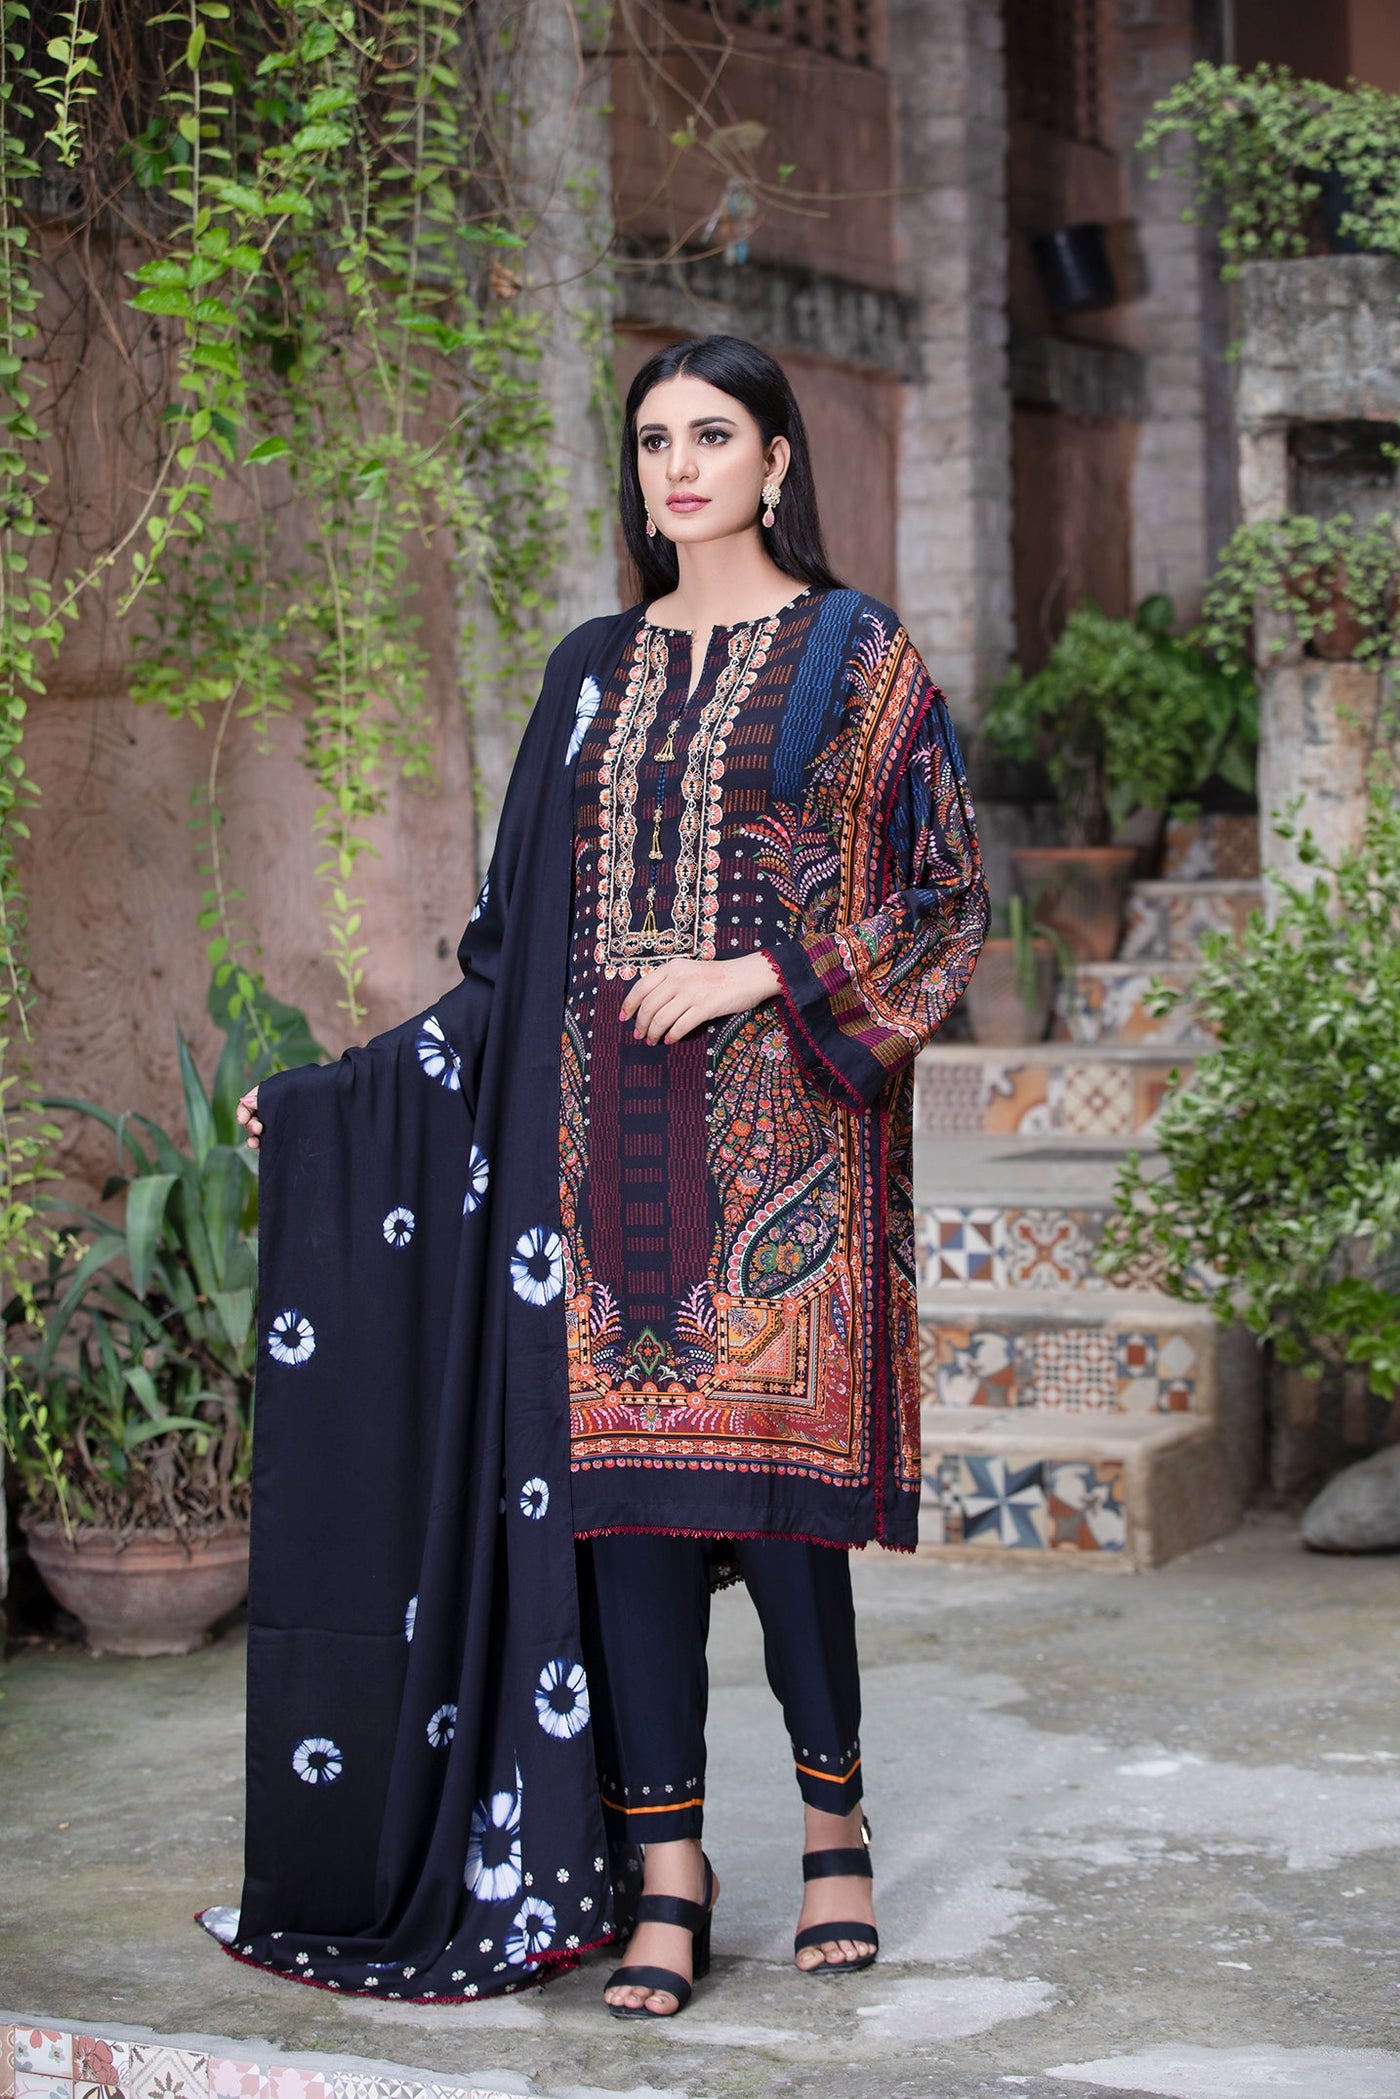 Cottel 3 Pcs Stitched Suit-Digital Printed Cottel Shirt with Neckline Embroidery-Cottel Digital Print Dupatta-Dyed Cottel trousers Front Near View 2